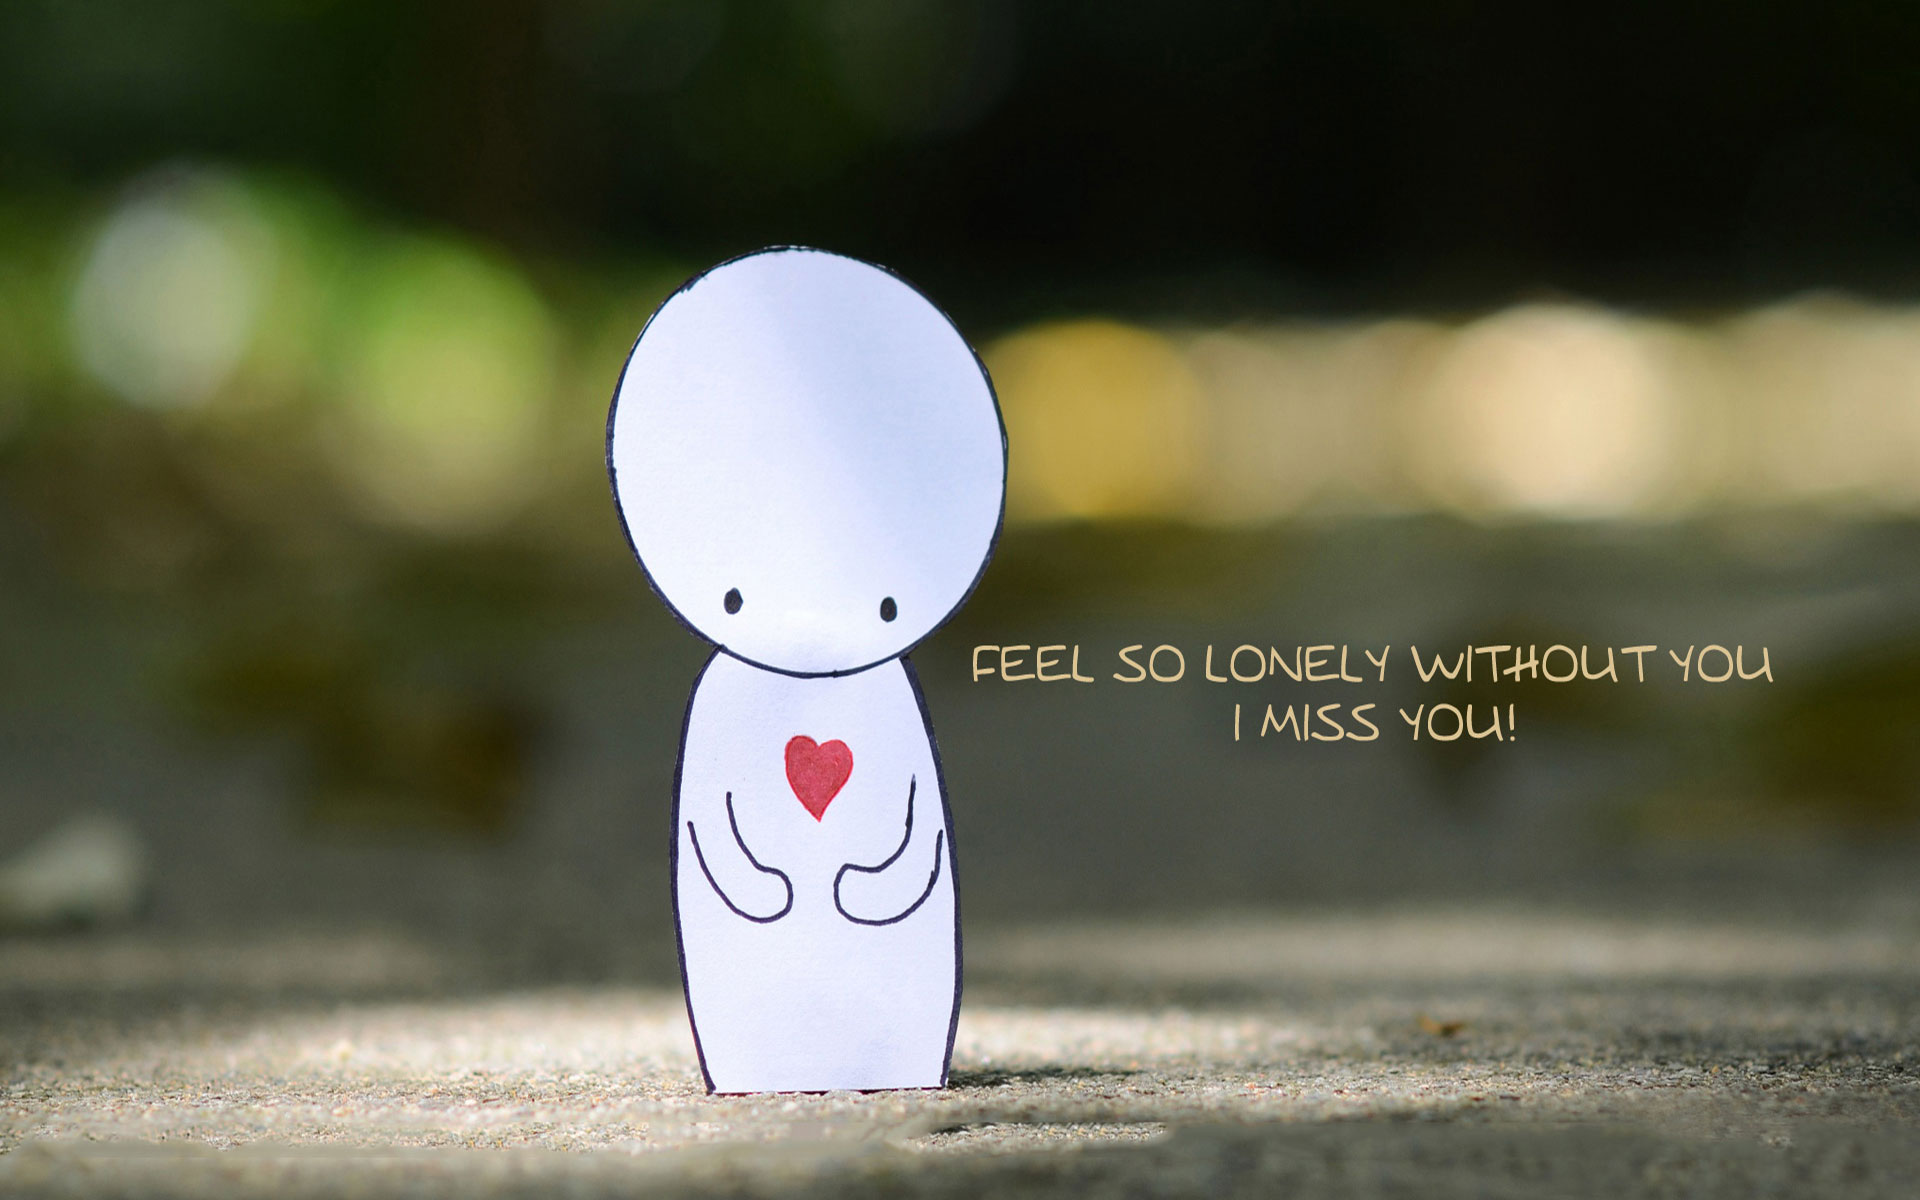 HD I Miss You Wallpaper For Him Or Her Romantic Wallpapers Chobirdokan